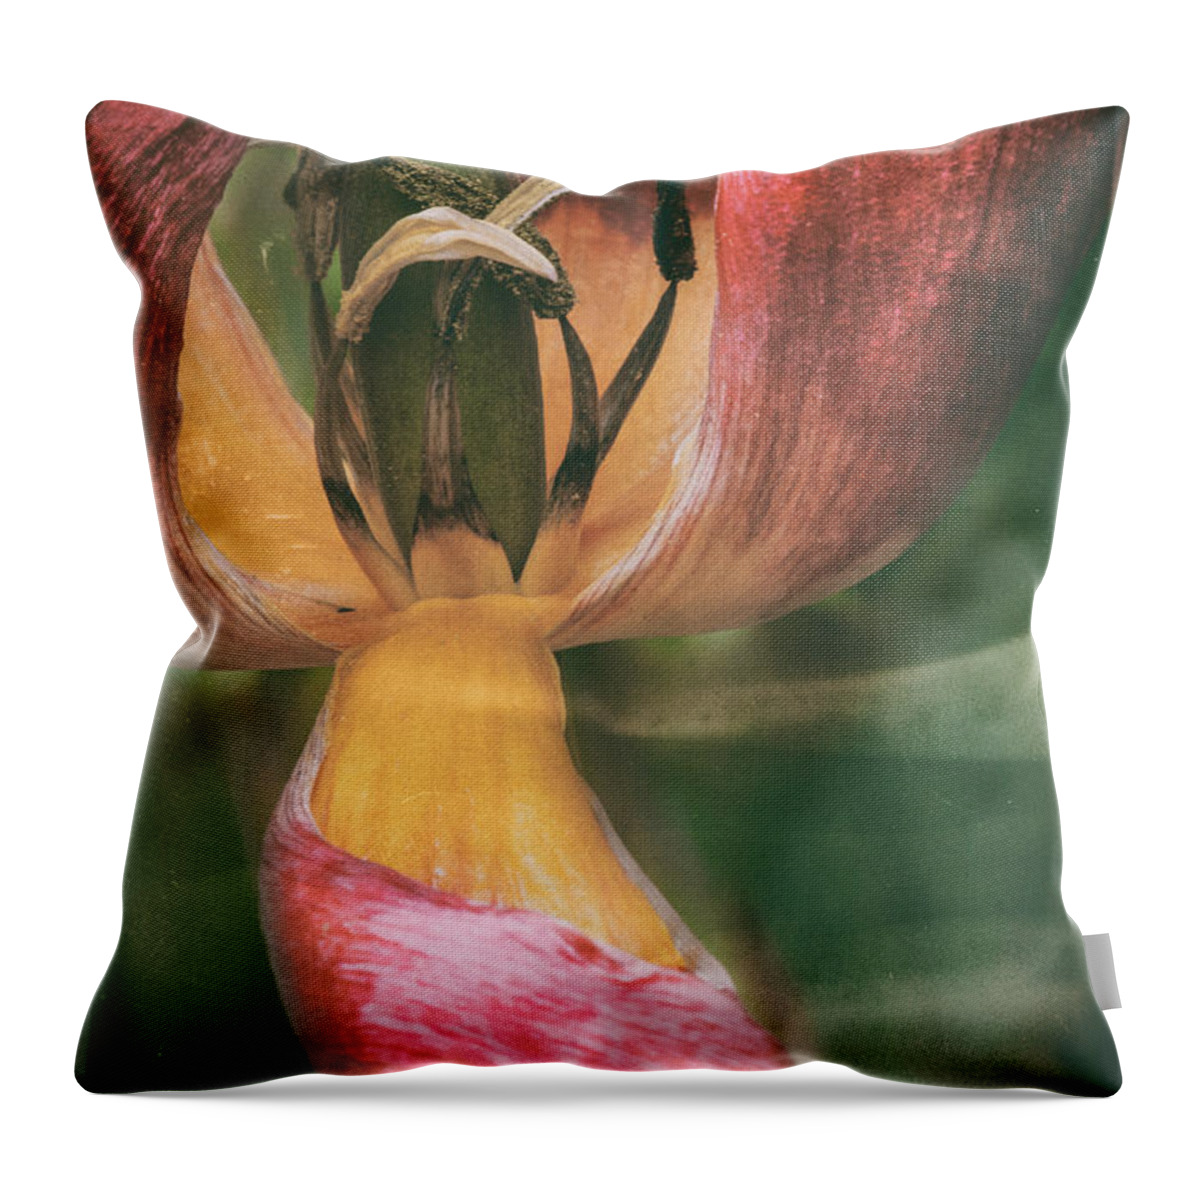 Flower Throw Pillow featuring the digital art And You Are Who by Paul Vitko